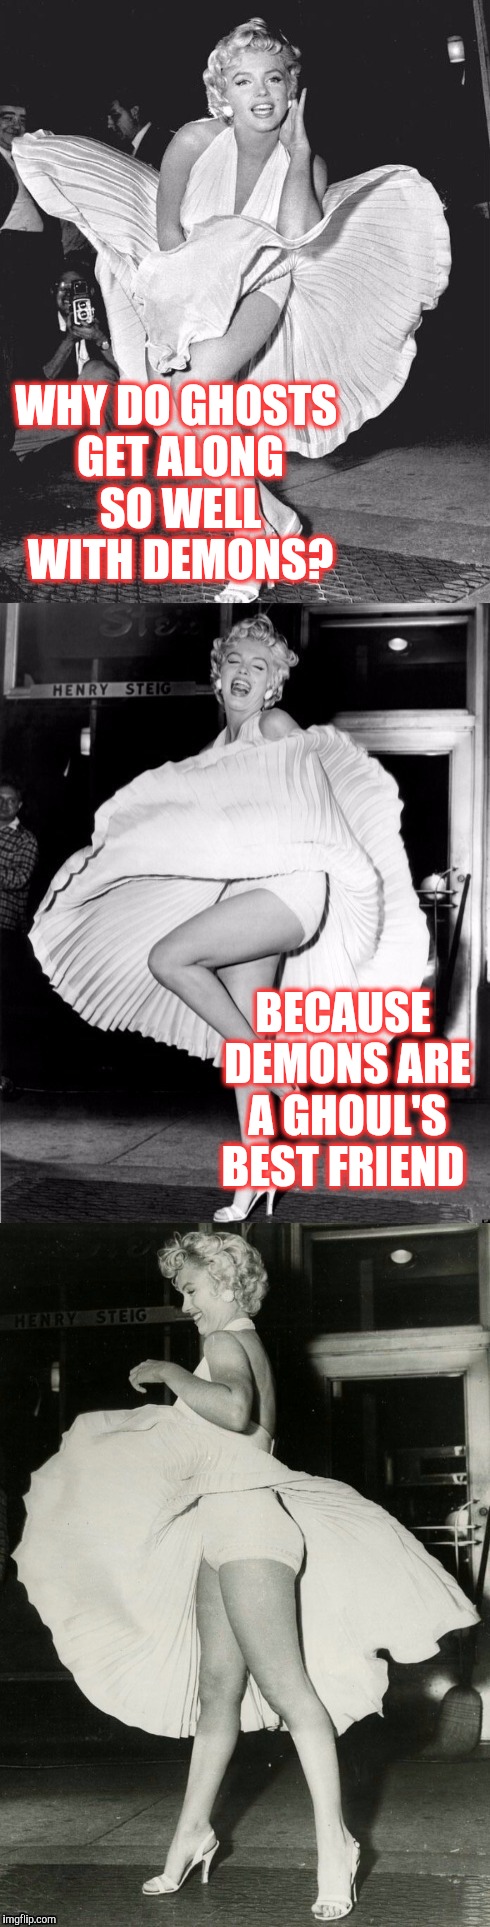 Had to pull out my Marilyn Monroe template for this joke lol.  Ghost Week, Jan. 21-27, A LaurynFlint Event! | WHY DO GHOSTS GET ALONG SO WELL WITH DEMONS? BECAUSE DEMONS ARE A GHOUL'S BEST FRIEND | image tagged in marilyn monroe joke template,jbmemegeek,ghost week,ghosts,marilyn monroe,bad puns | made w/ Imgflip meme maker